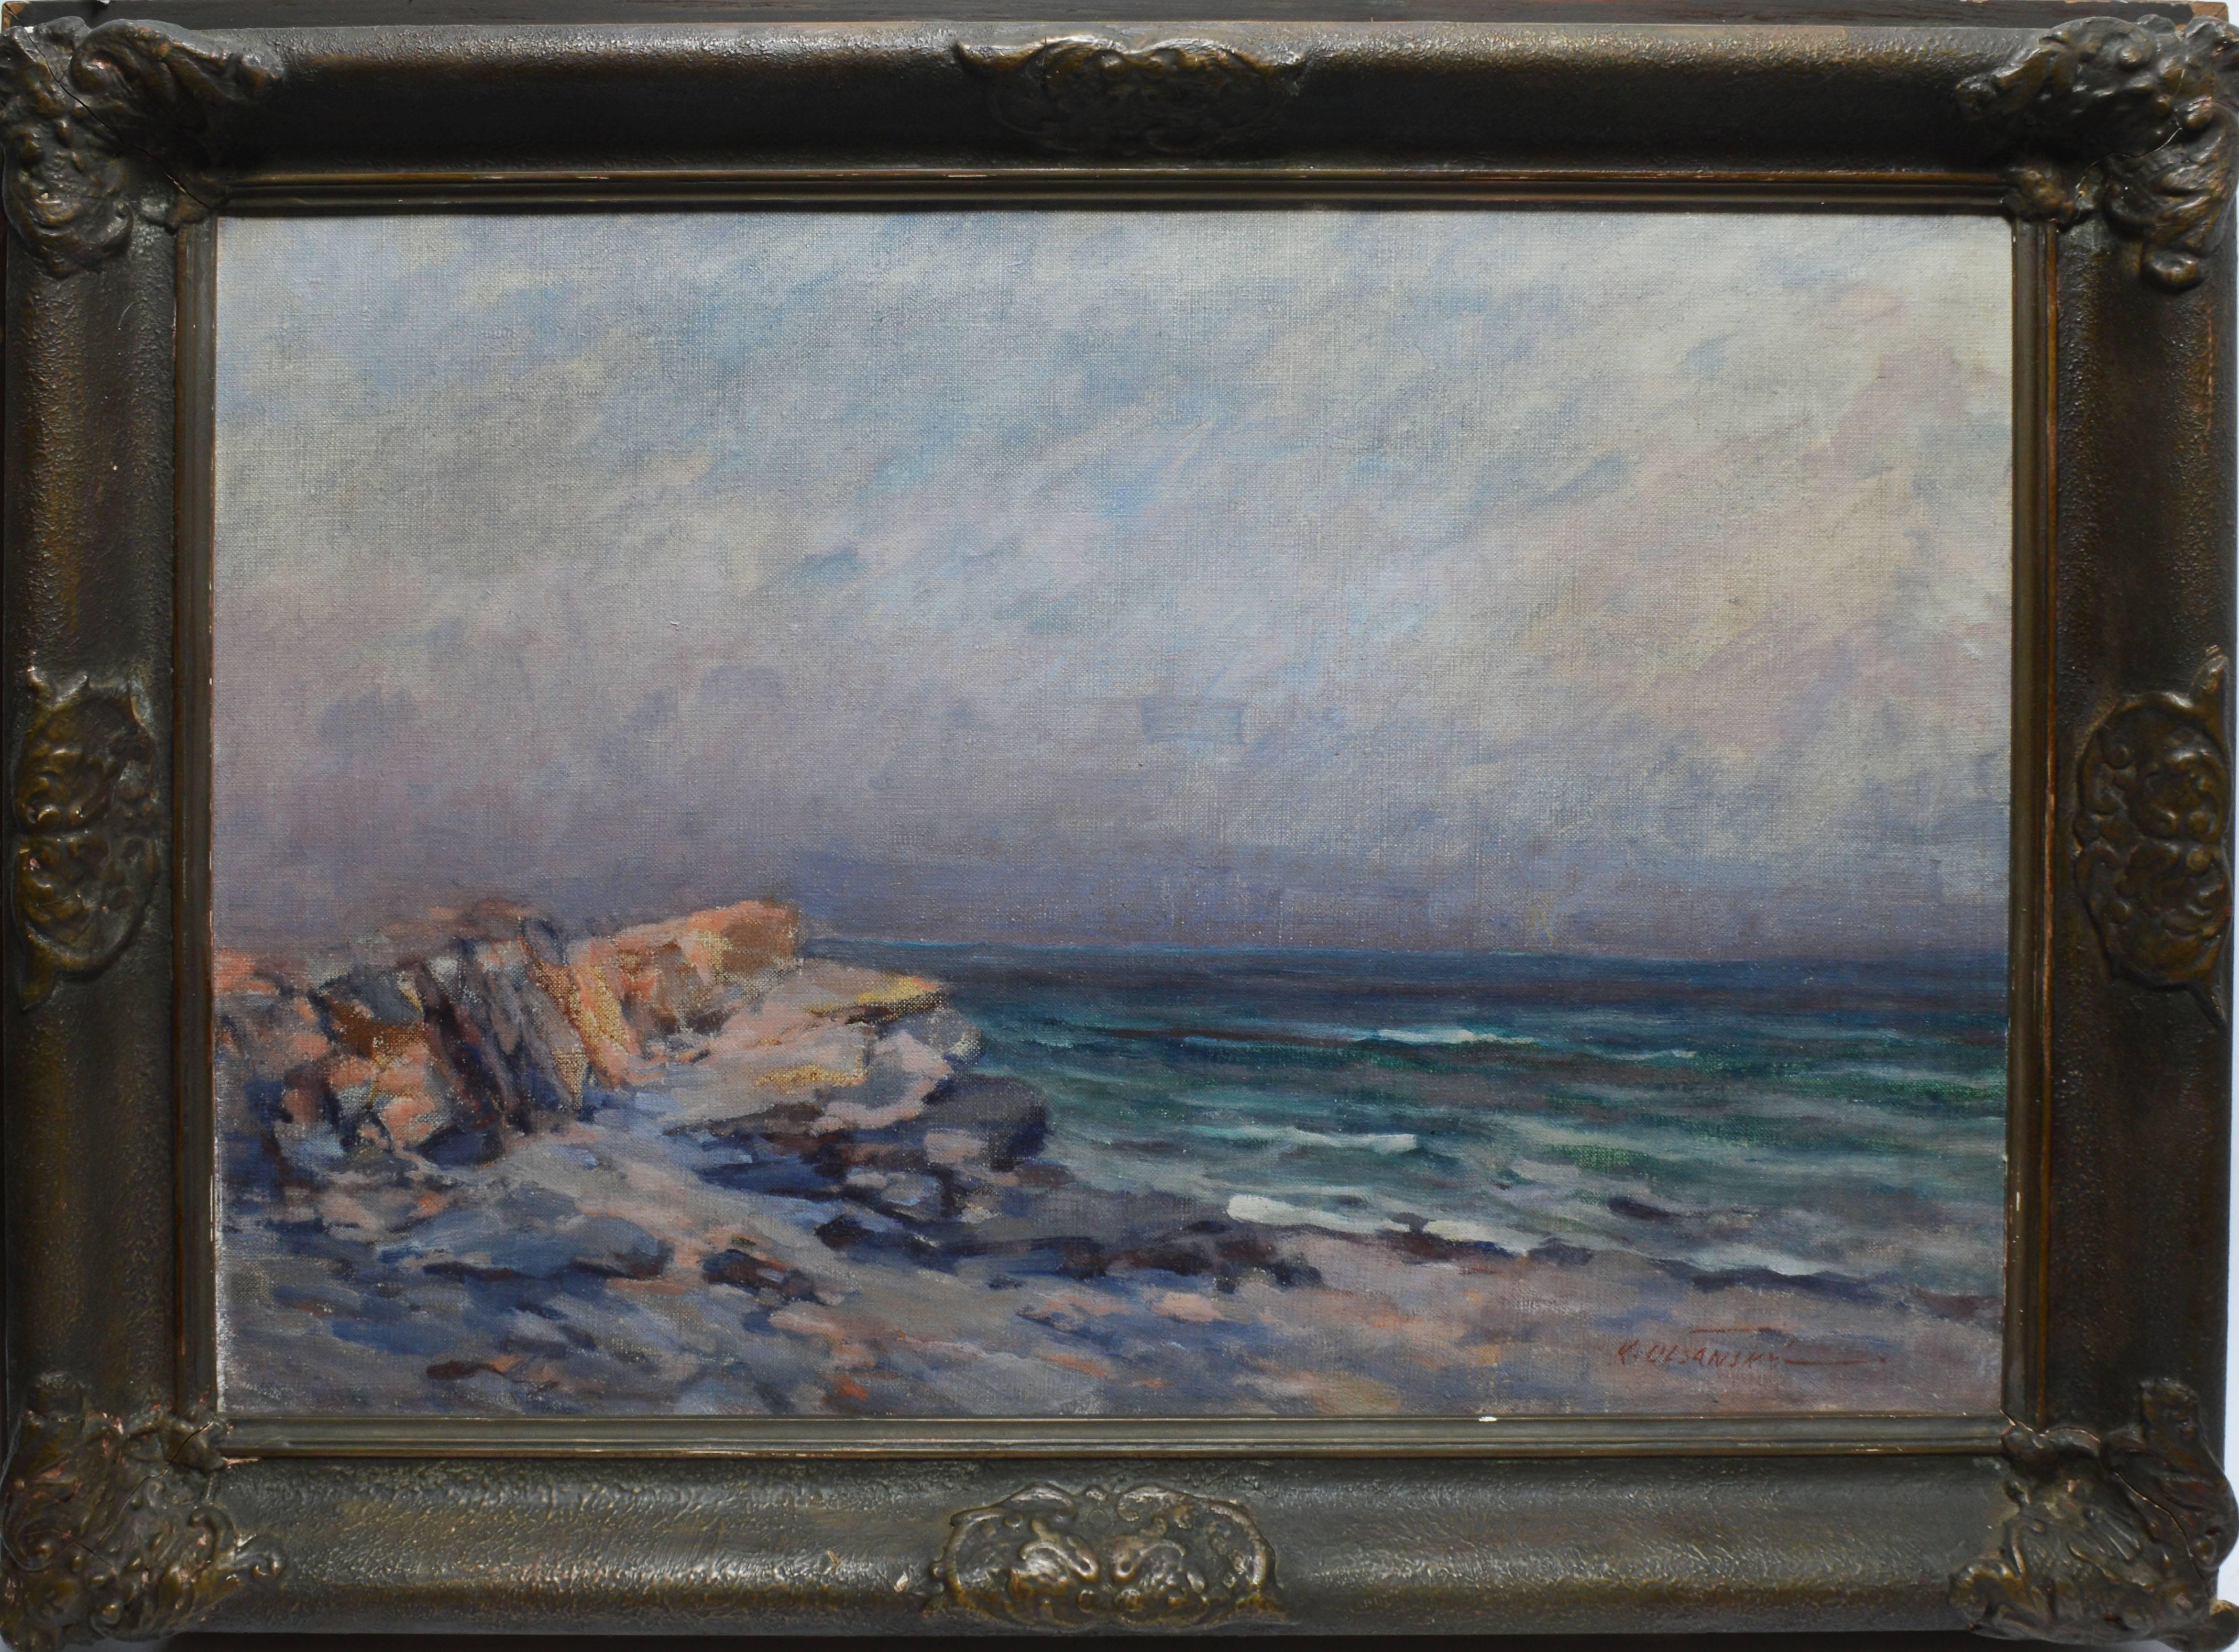 Impressionist view of a sunlit beach scene by Klement Olsansky  (c.1909 - 1963).  Oil on canvas, circa 1930.  Signed lower right, "K. Olansky".  Displayed in a period impressionist frame.  Image size, 28"L x 20"H, overall 34"L x 26"H.